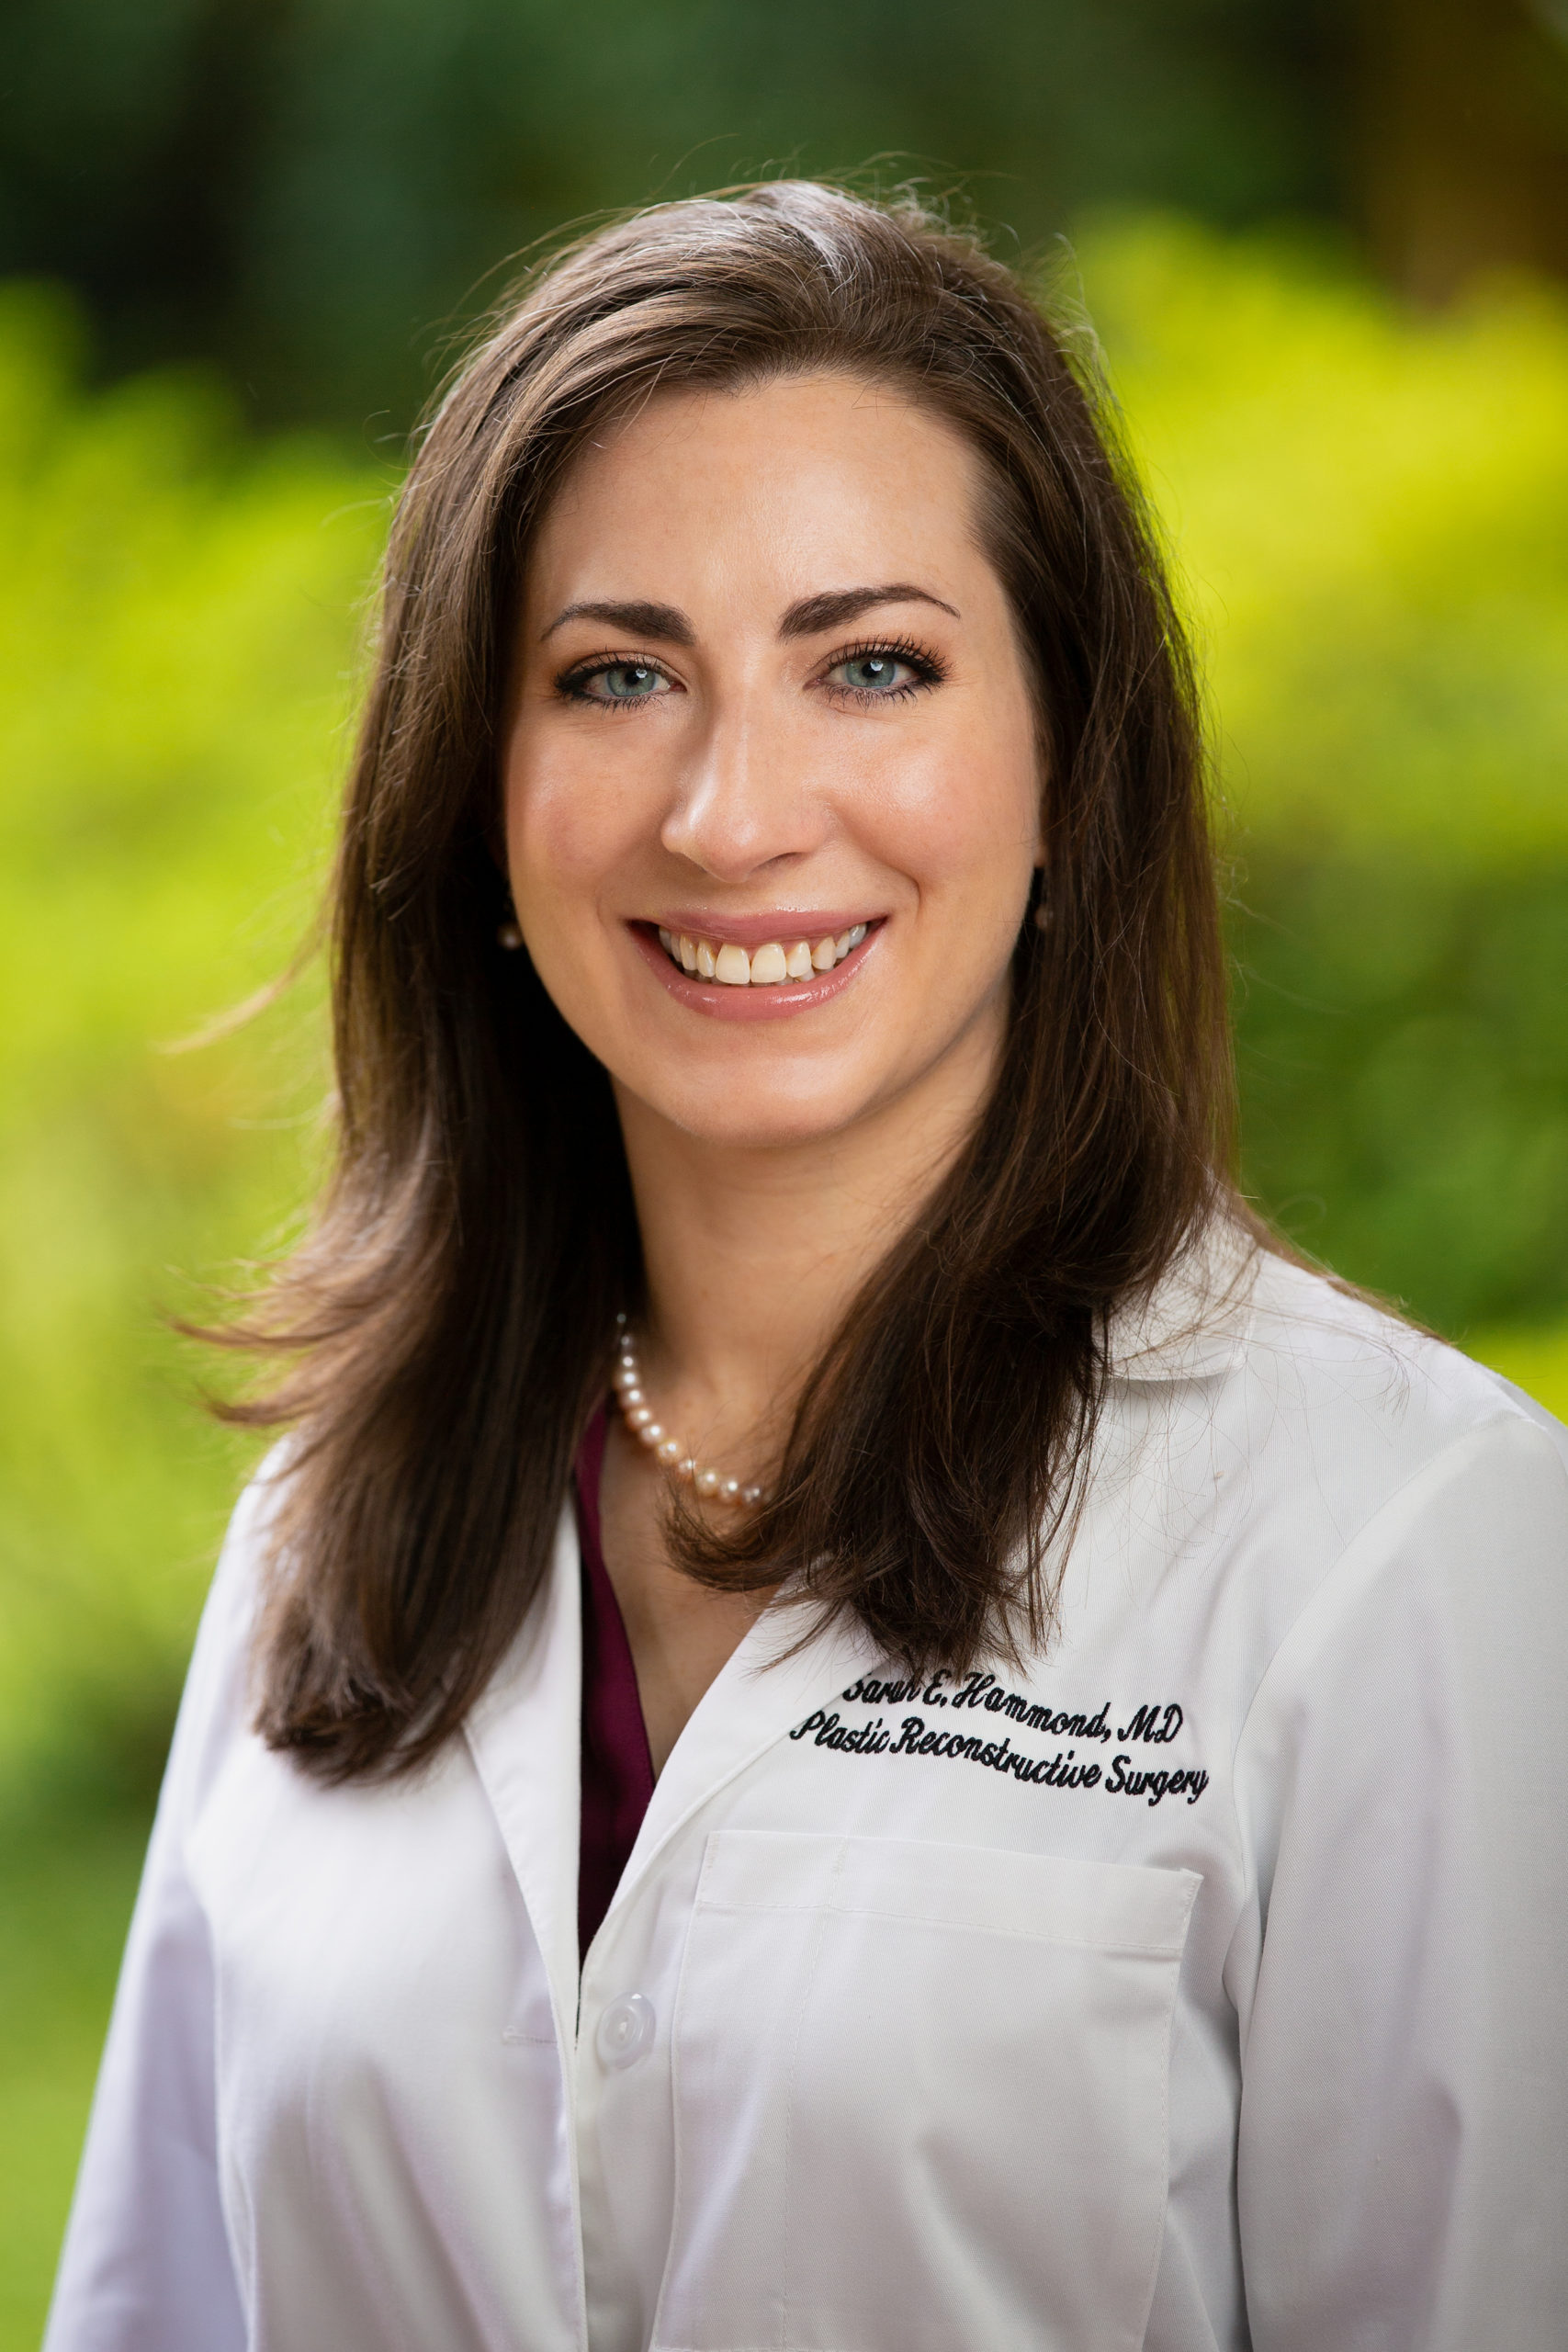 <h3>Sarah Hammond, M.D.</h3>
<h5>Plastic & Reconstructive Surgeon</h5>
<p>Dr. Hammond guides patients through the entire treatment process, from preoperative planning to recovery.</p>